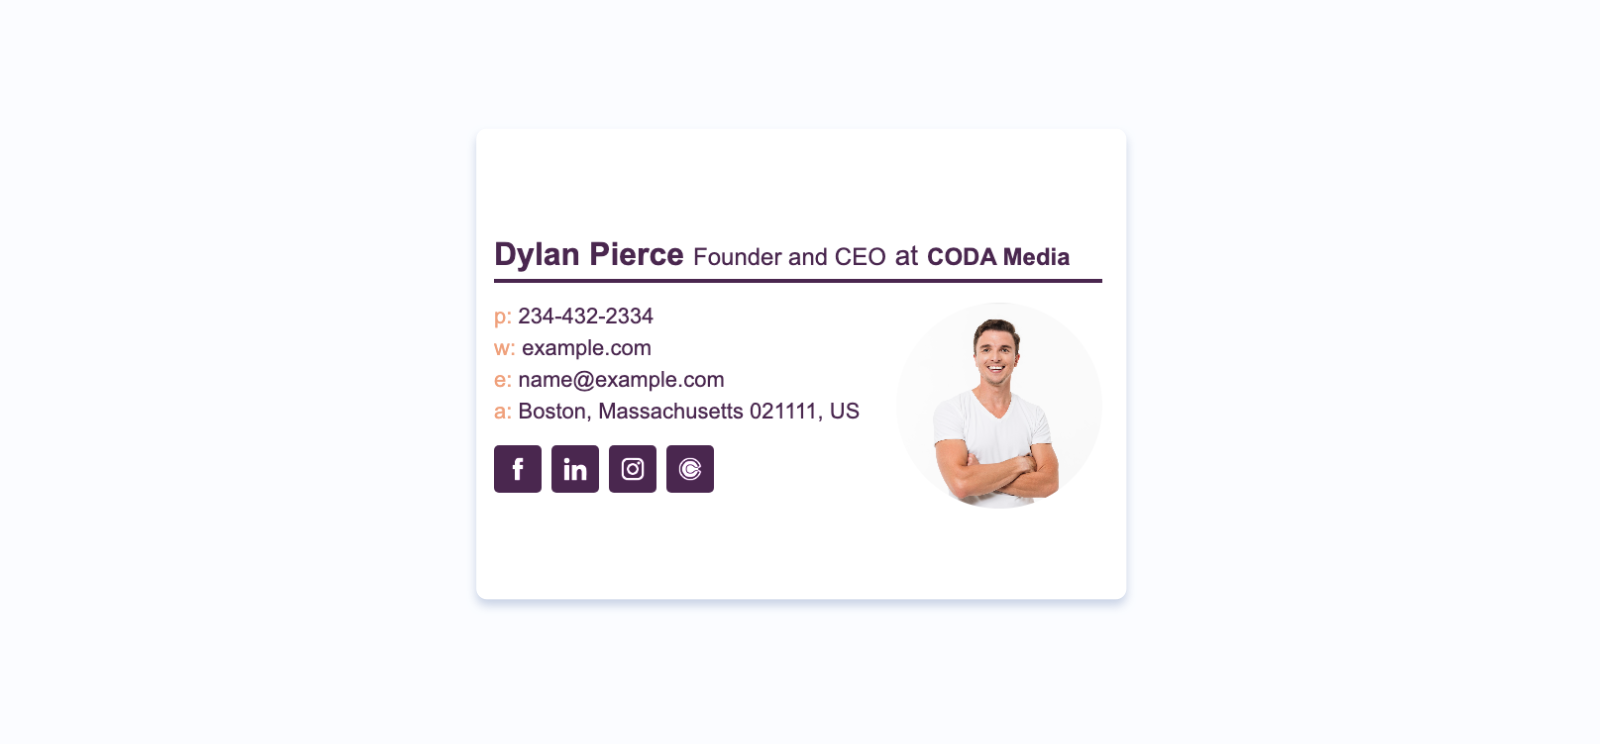 Add social icons to your email footer